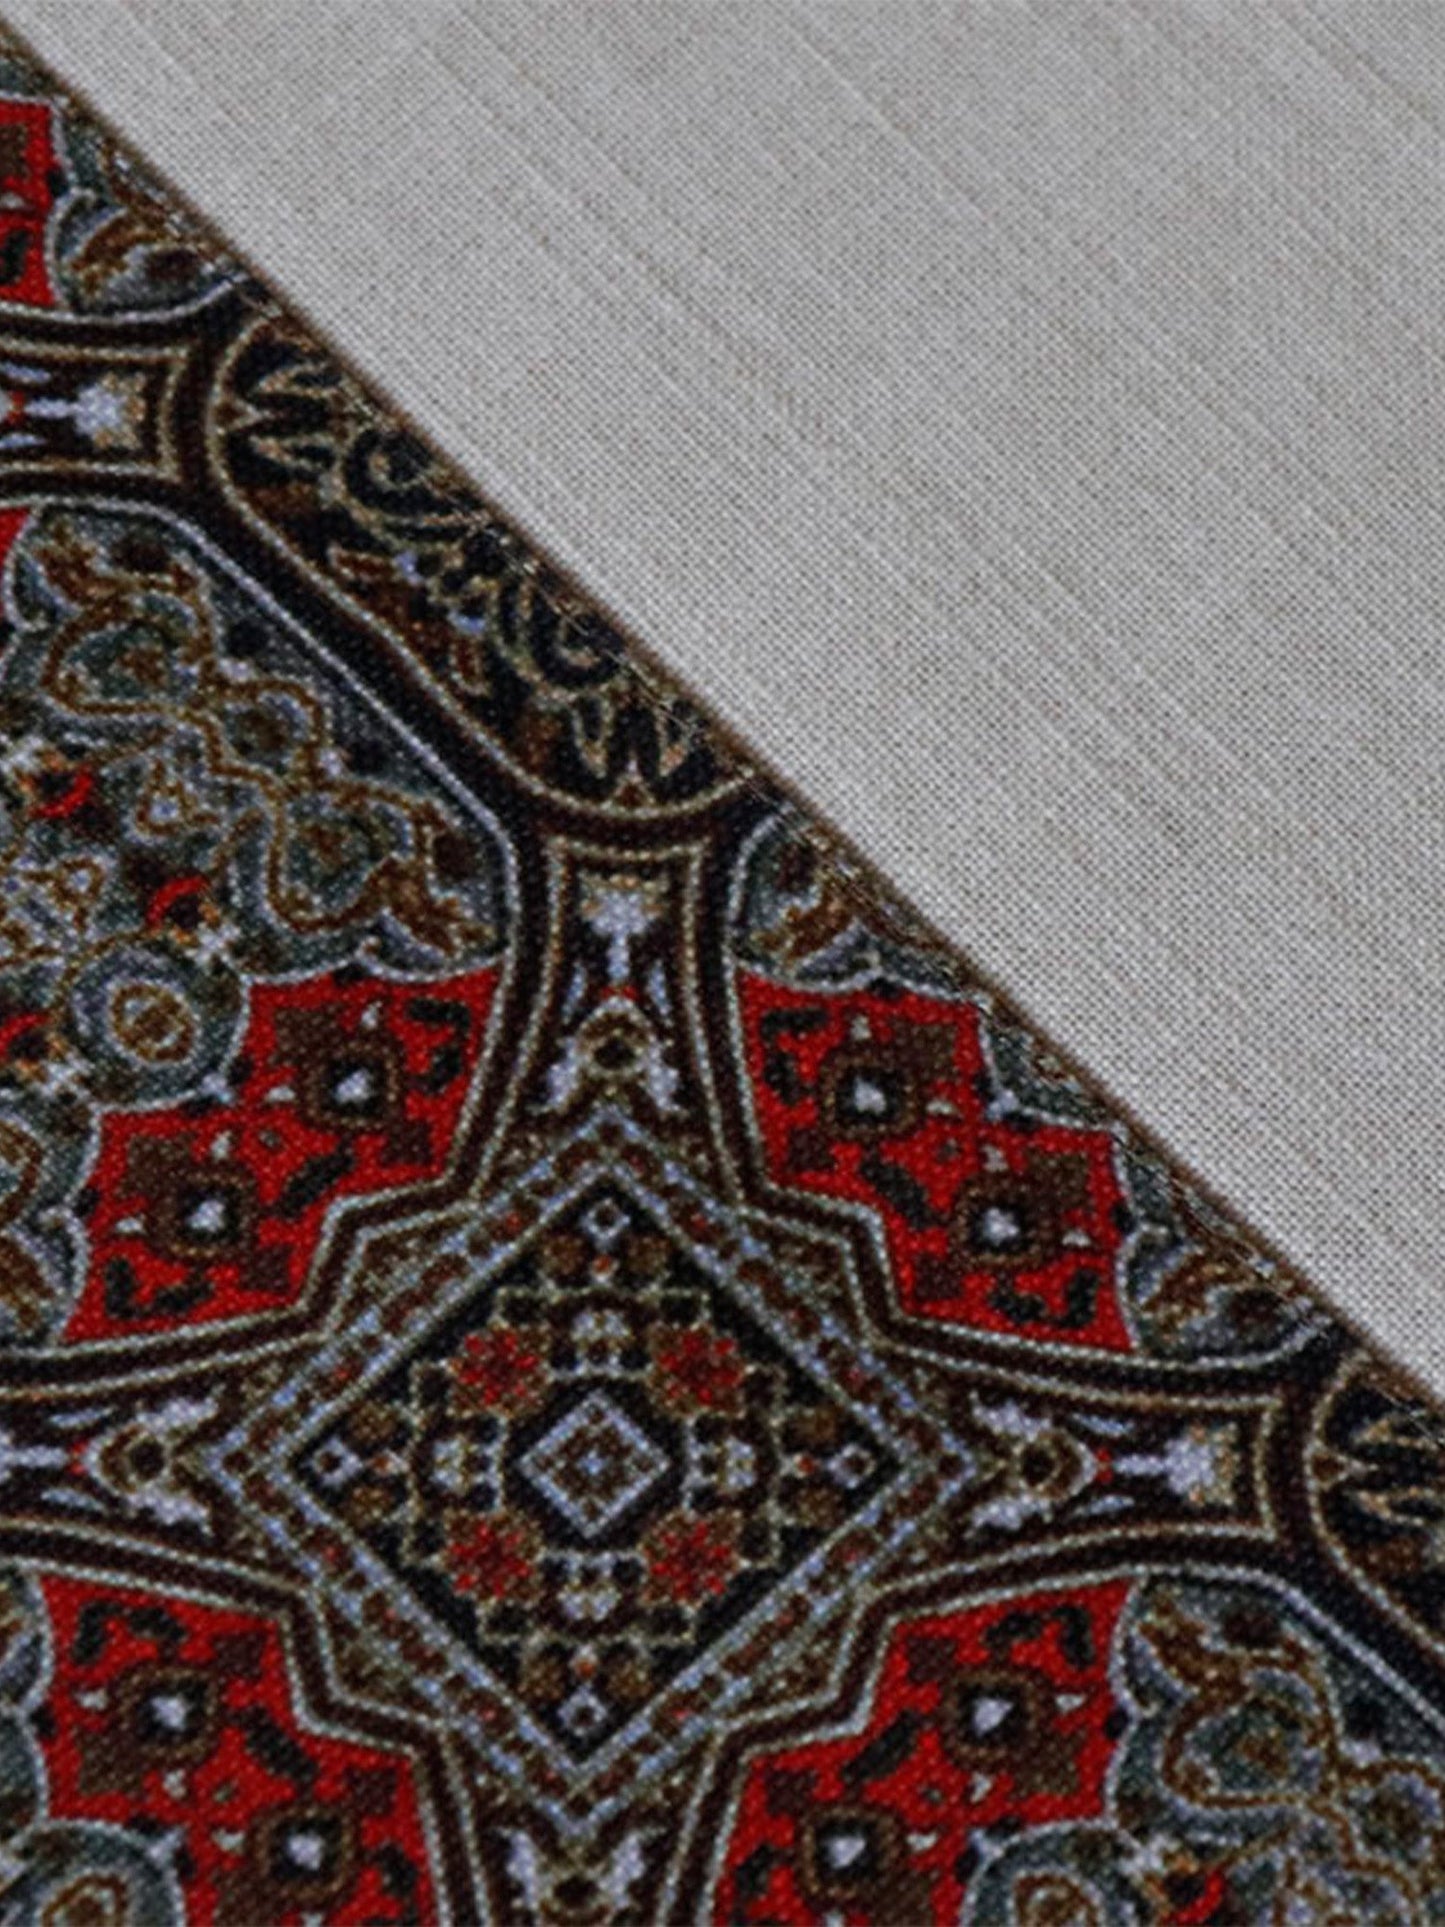 Table Cover Cotton Blend Patchwork with Printing Beige - 52" X 84"